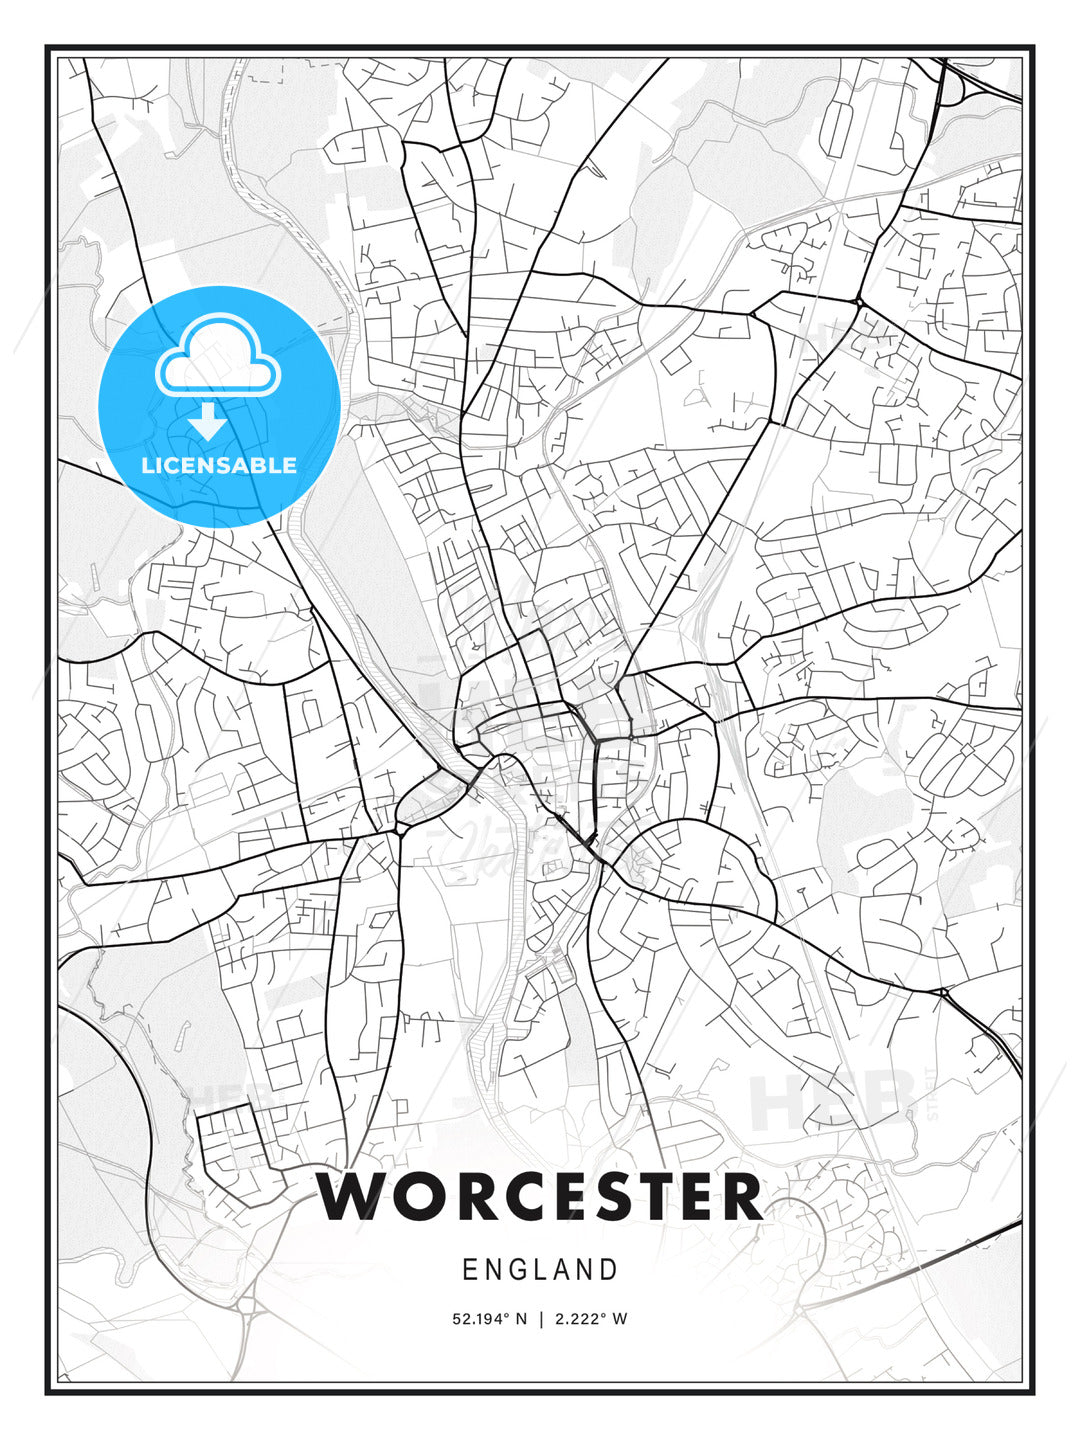 Worcester, England, Modern Print Template in Various Formats - HEBSTREITS Sketches